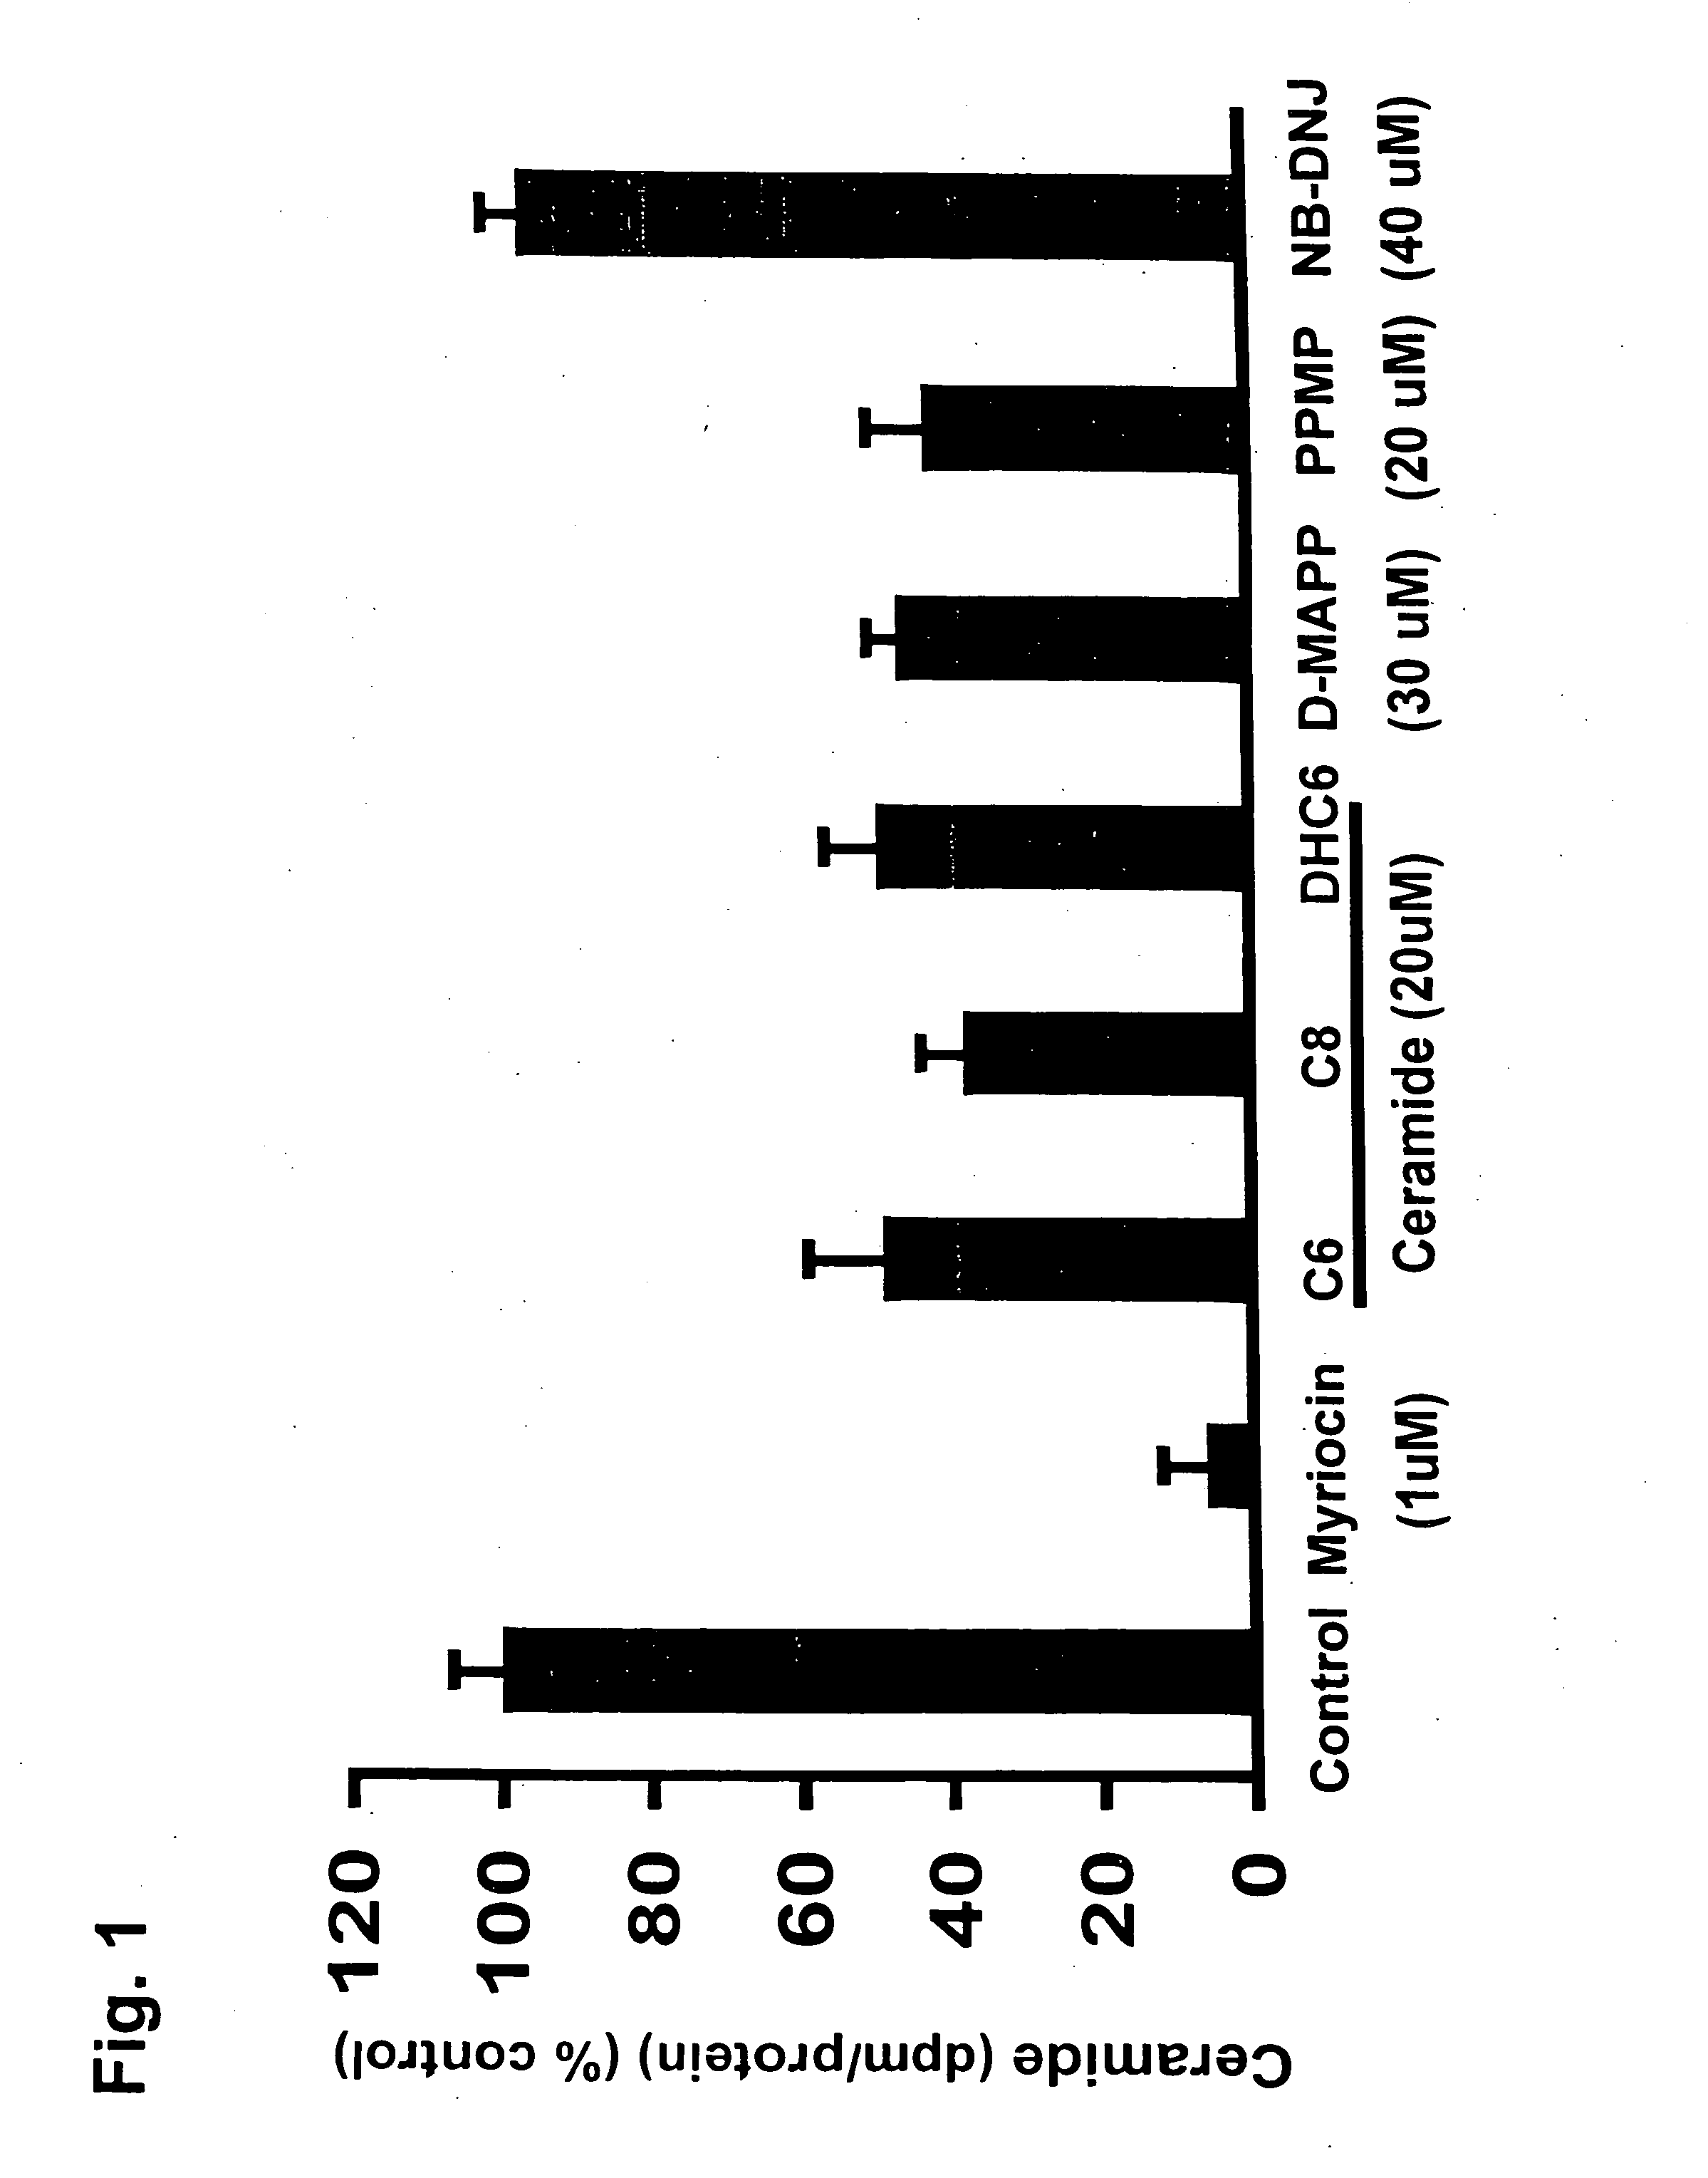 Ceramide de novo synthesis-based therapeutic and prophylactic methods, and related articles of manufacture